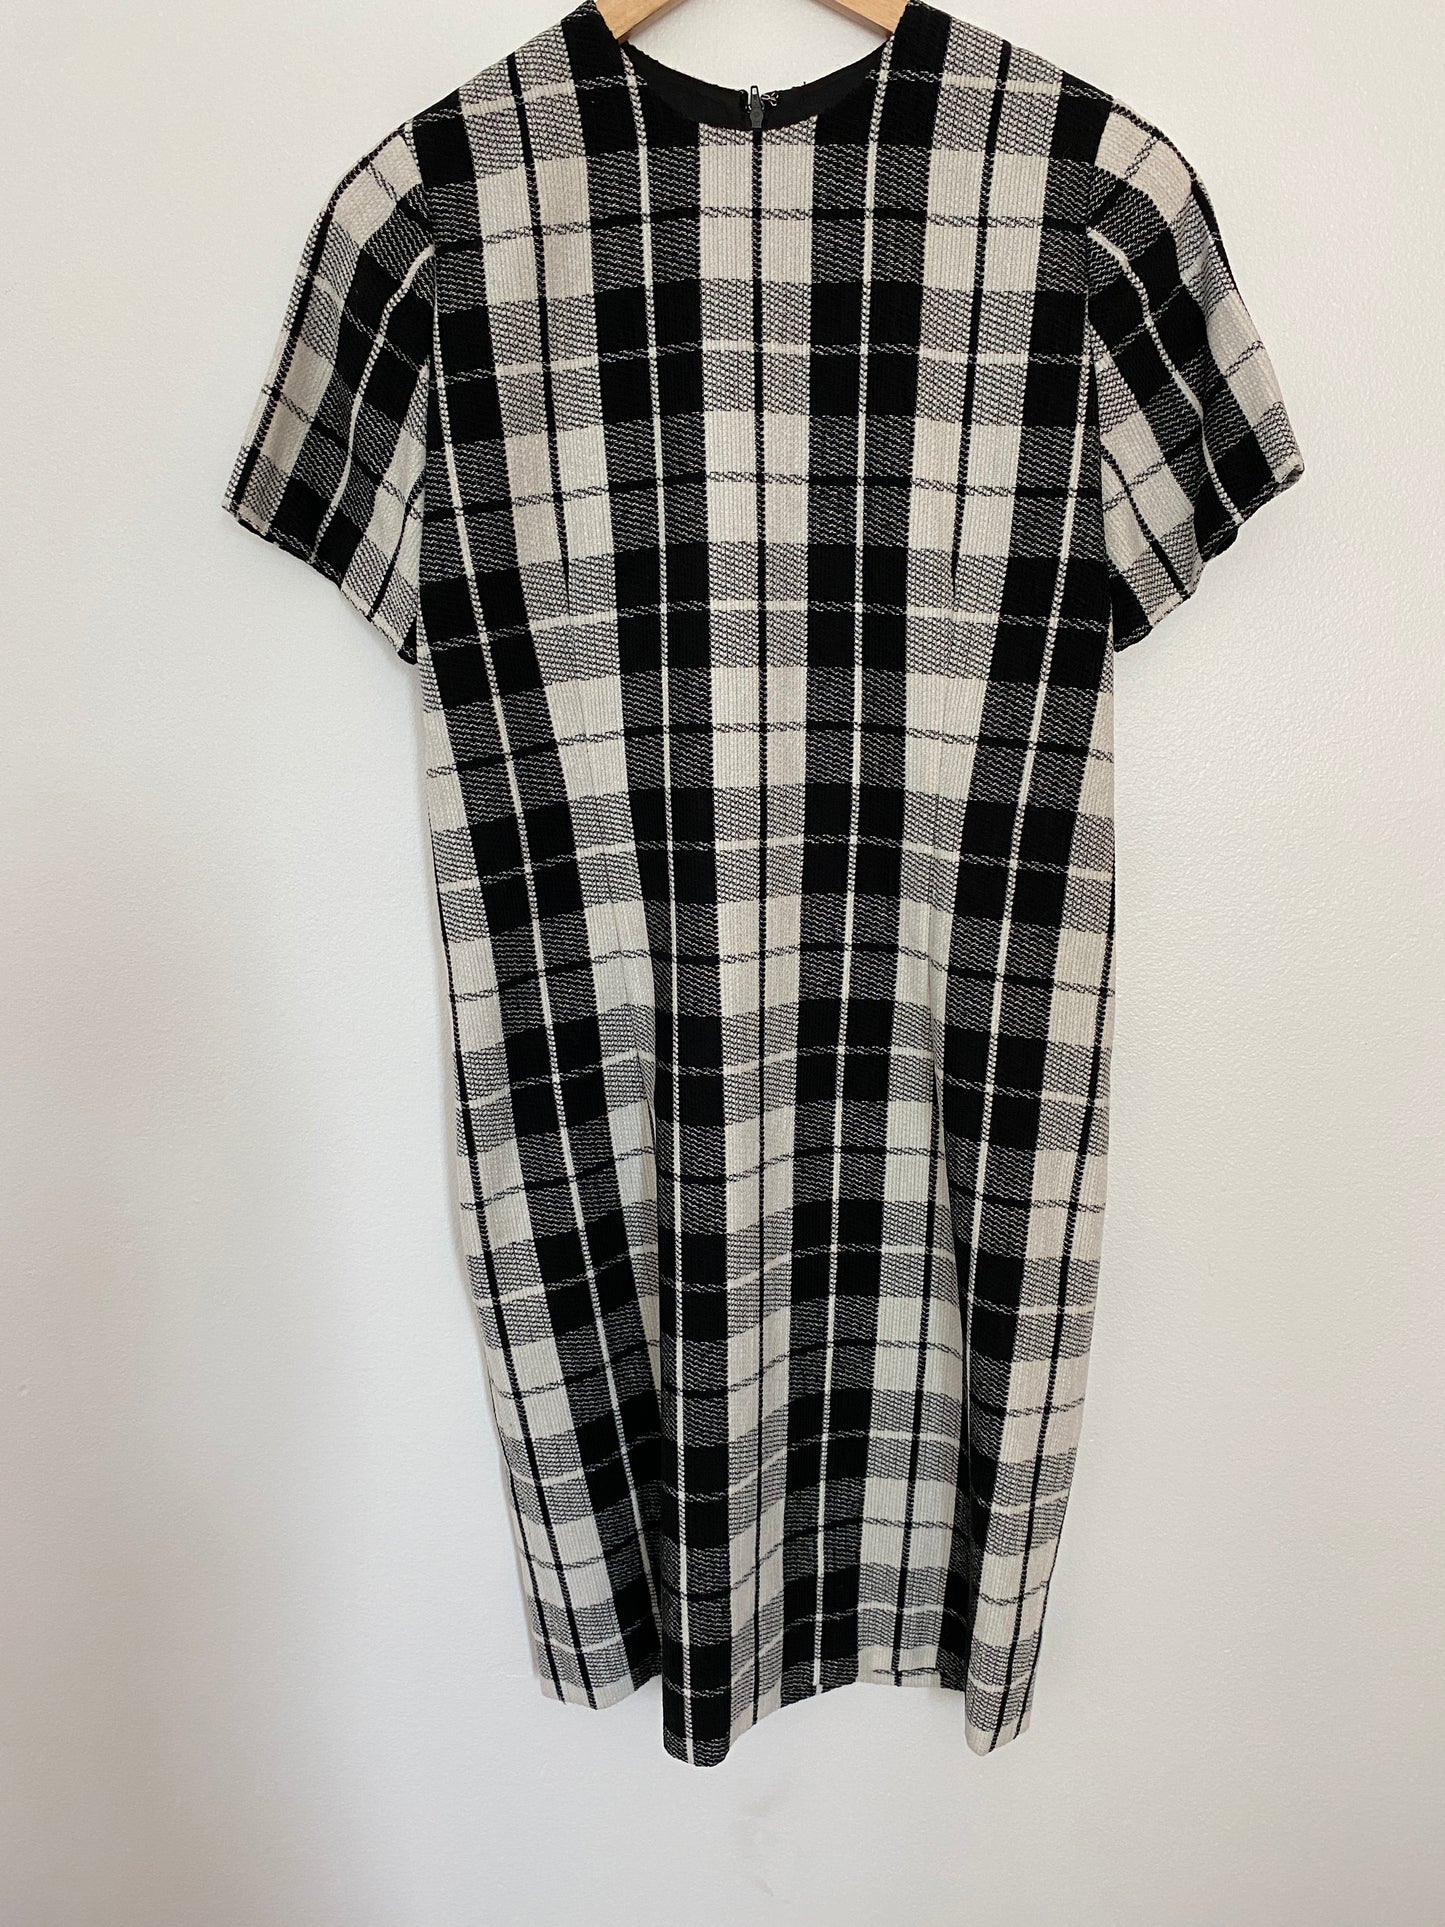 Black Checkered 80s Suit, Bust 38”